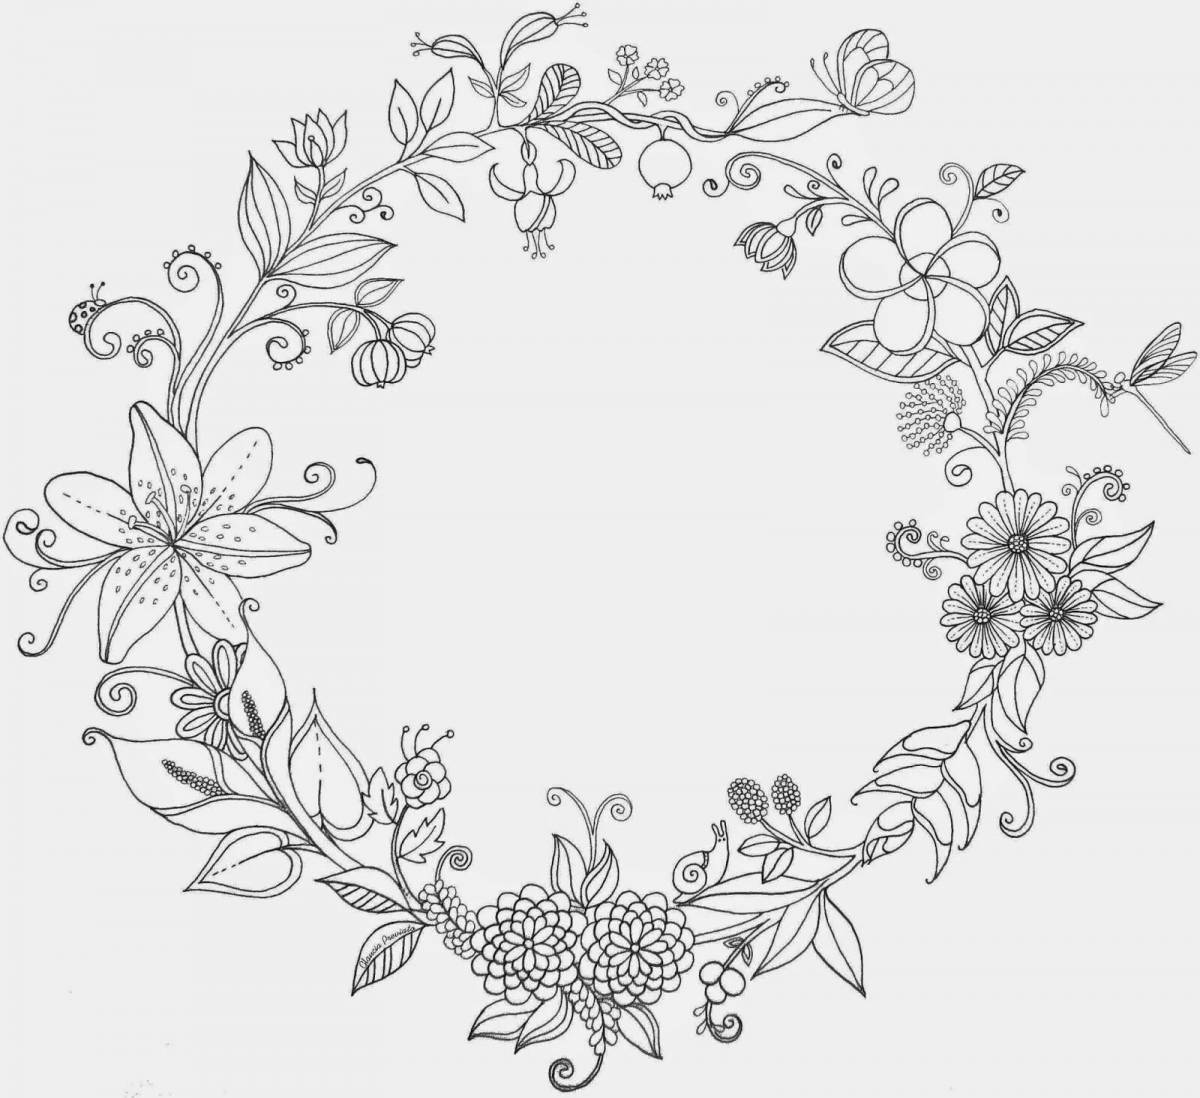 Coloring book shining wreath of flowers